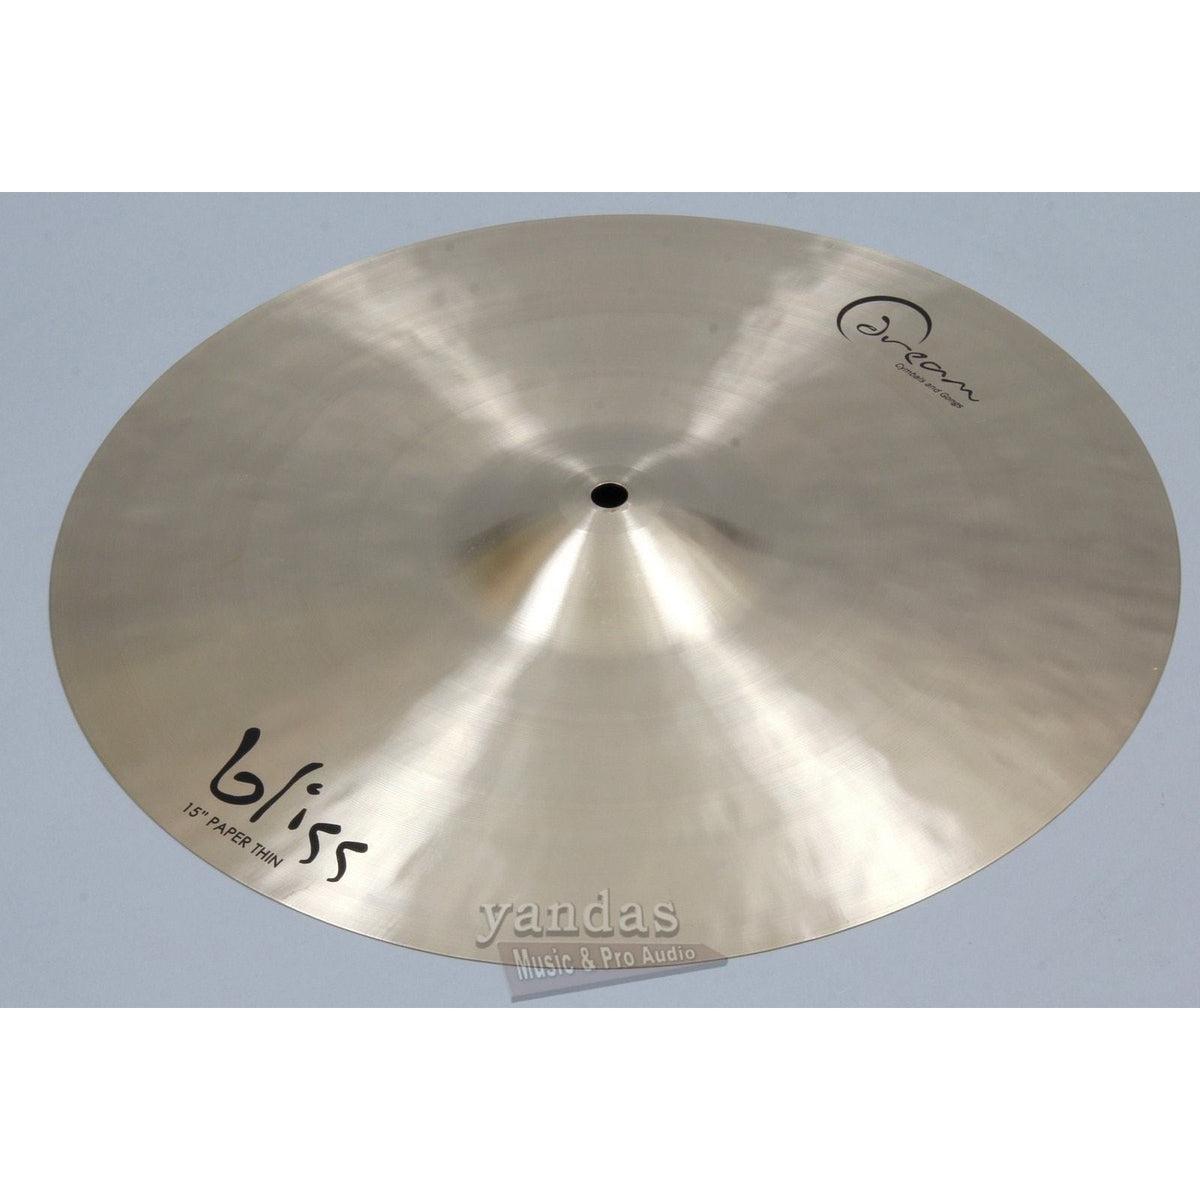 Dream Cymbals Bliss Paper Thin Crash Cymbal 15 Inch